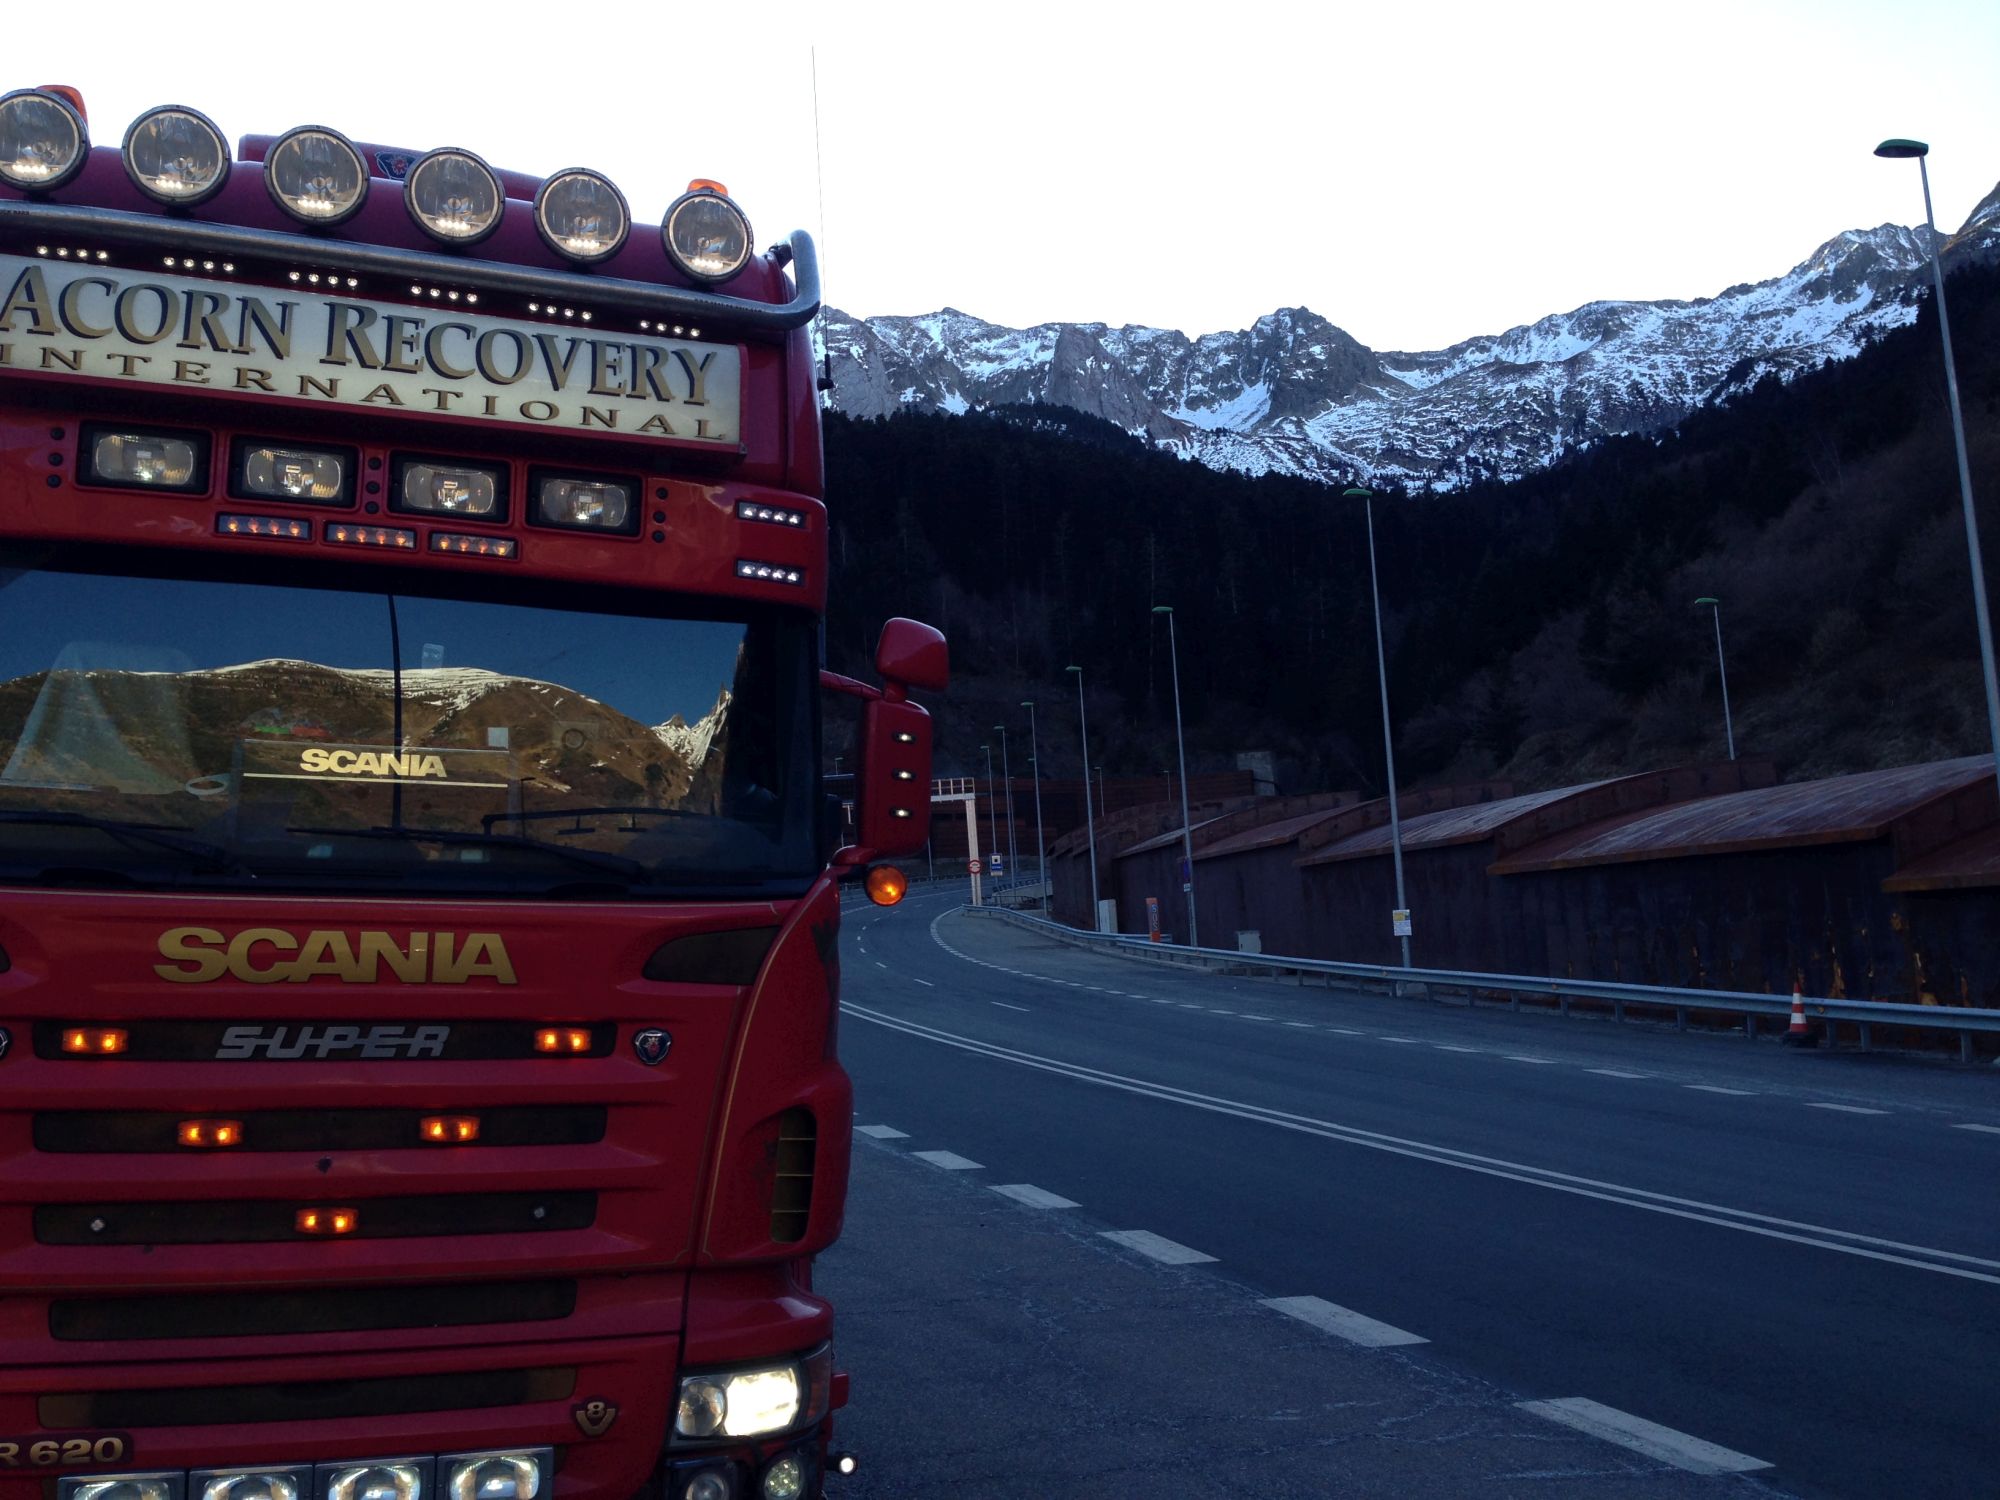 Scania Alps France Recovery 001 2